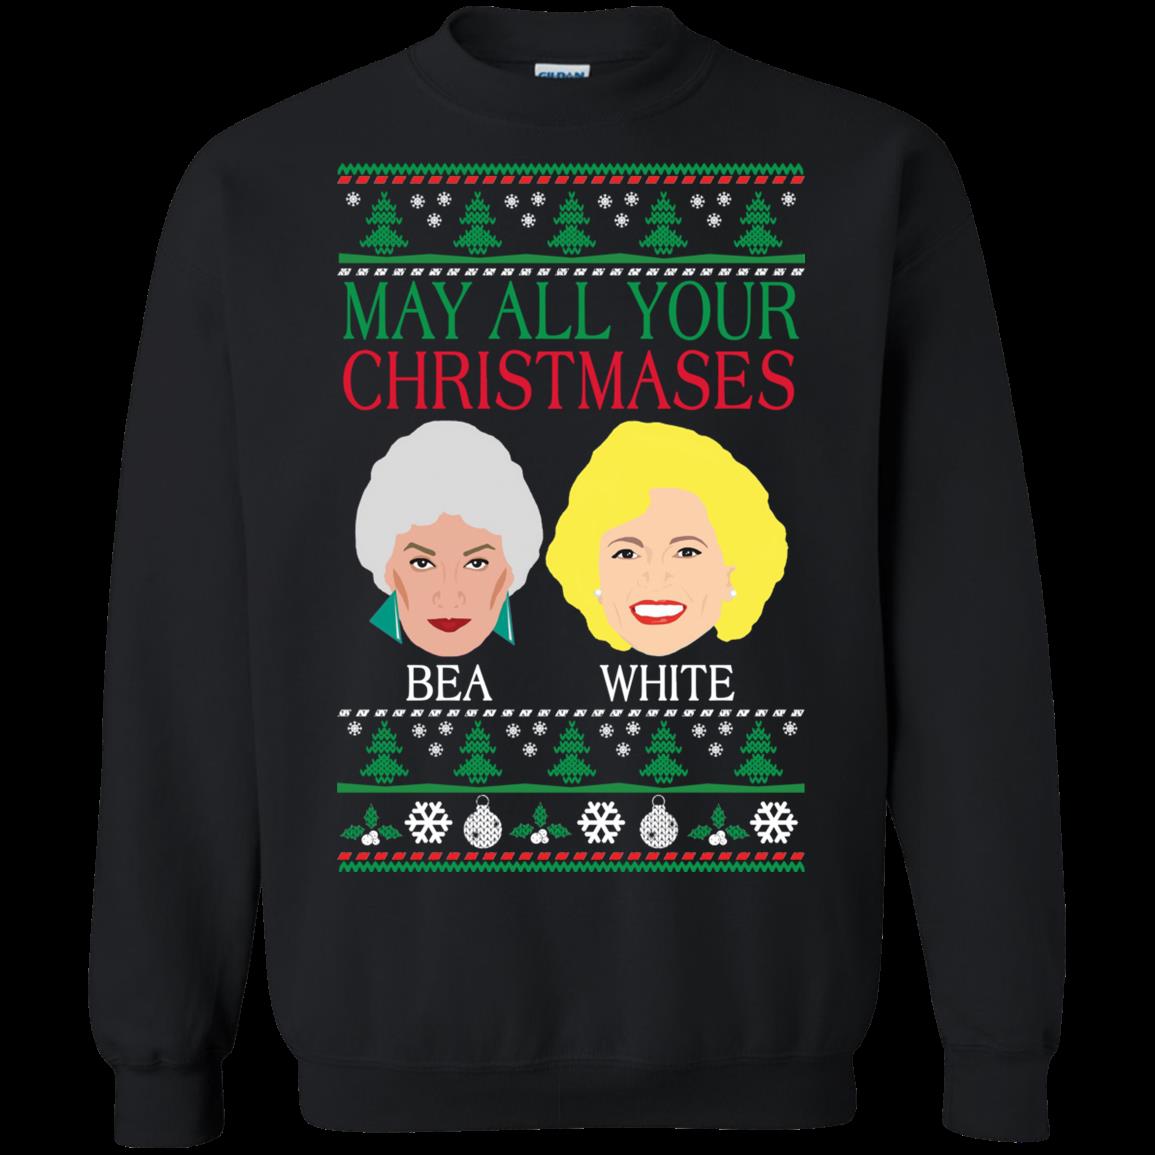 The Golden Girls Ugly Christmas Sweater Shirts May All Your Christmases T Shirt Hoodies Sweatshirt